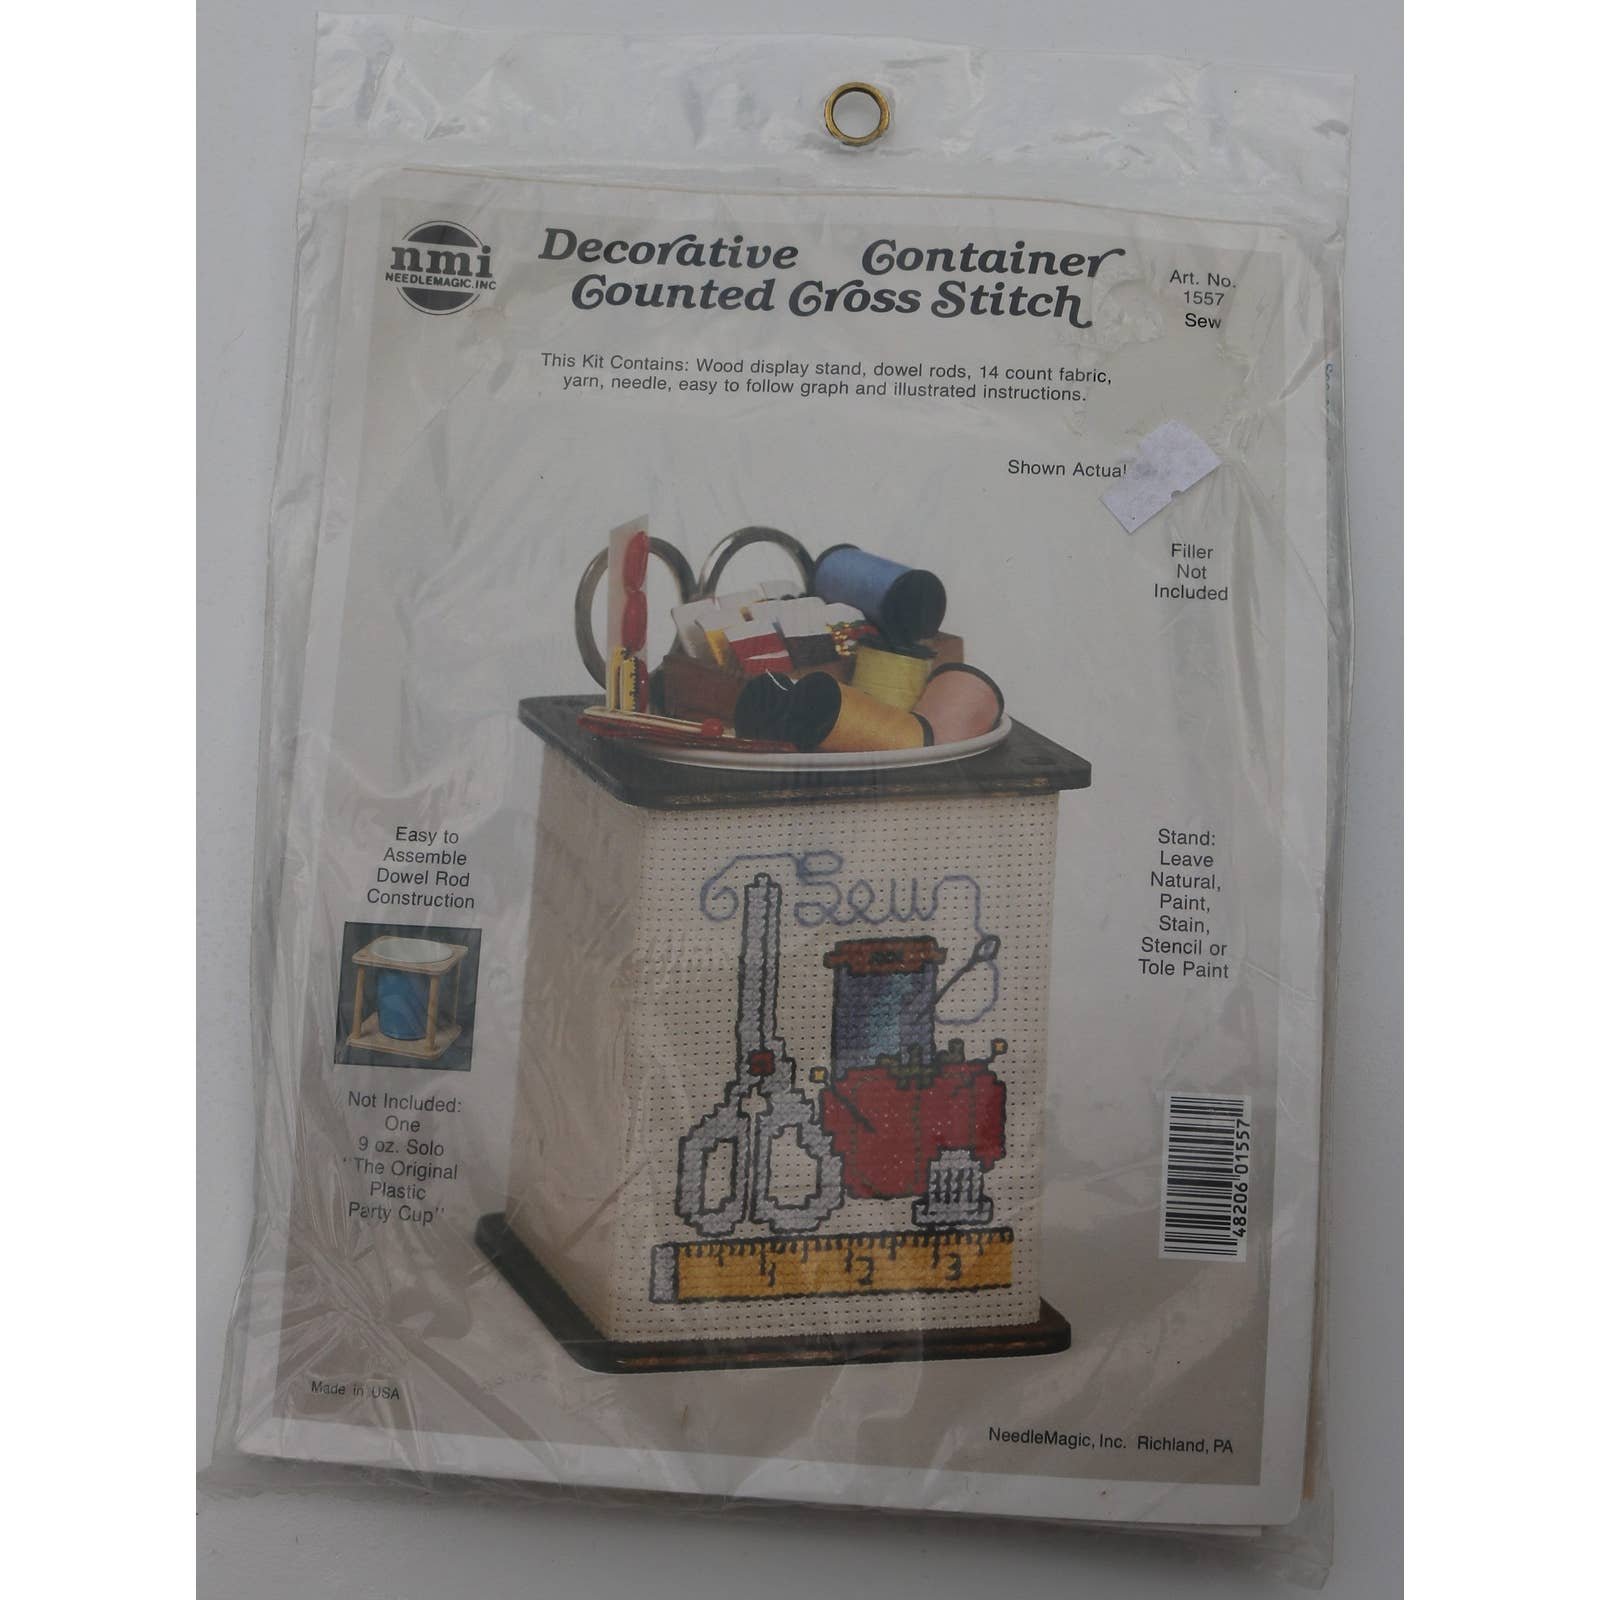 Needle Magic Inc, Deco Container Counted Cross Stitch Kit, Unopened, Solo Cup 2xhmvrkr2